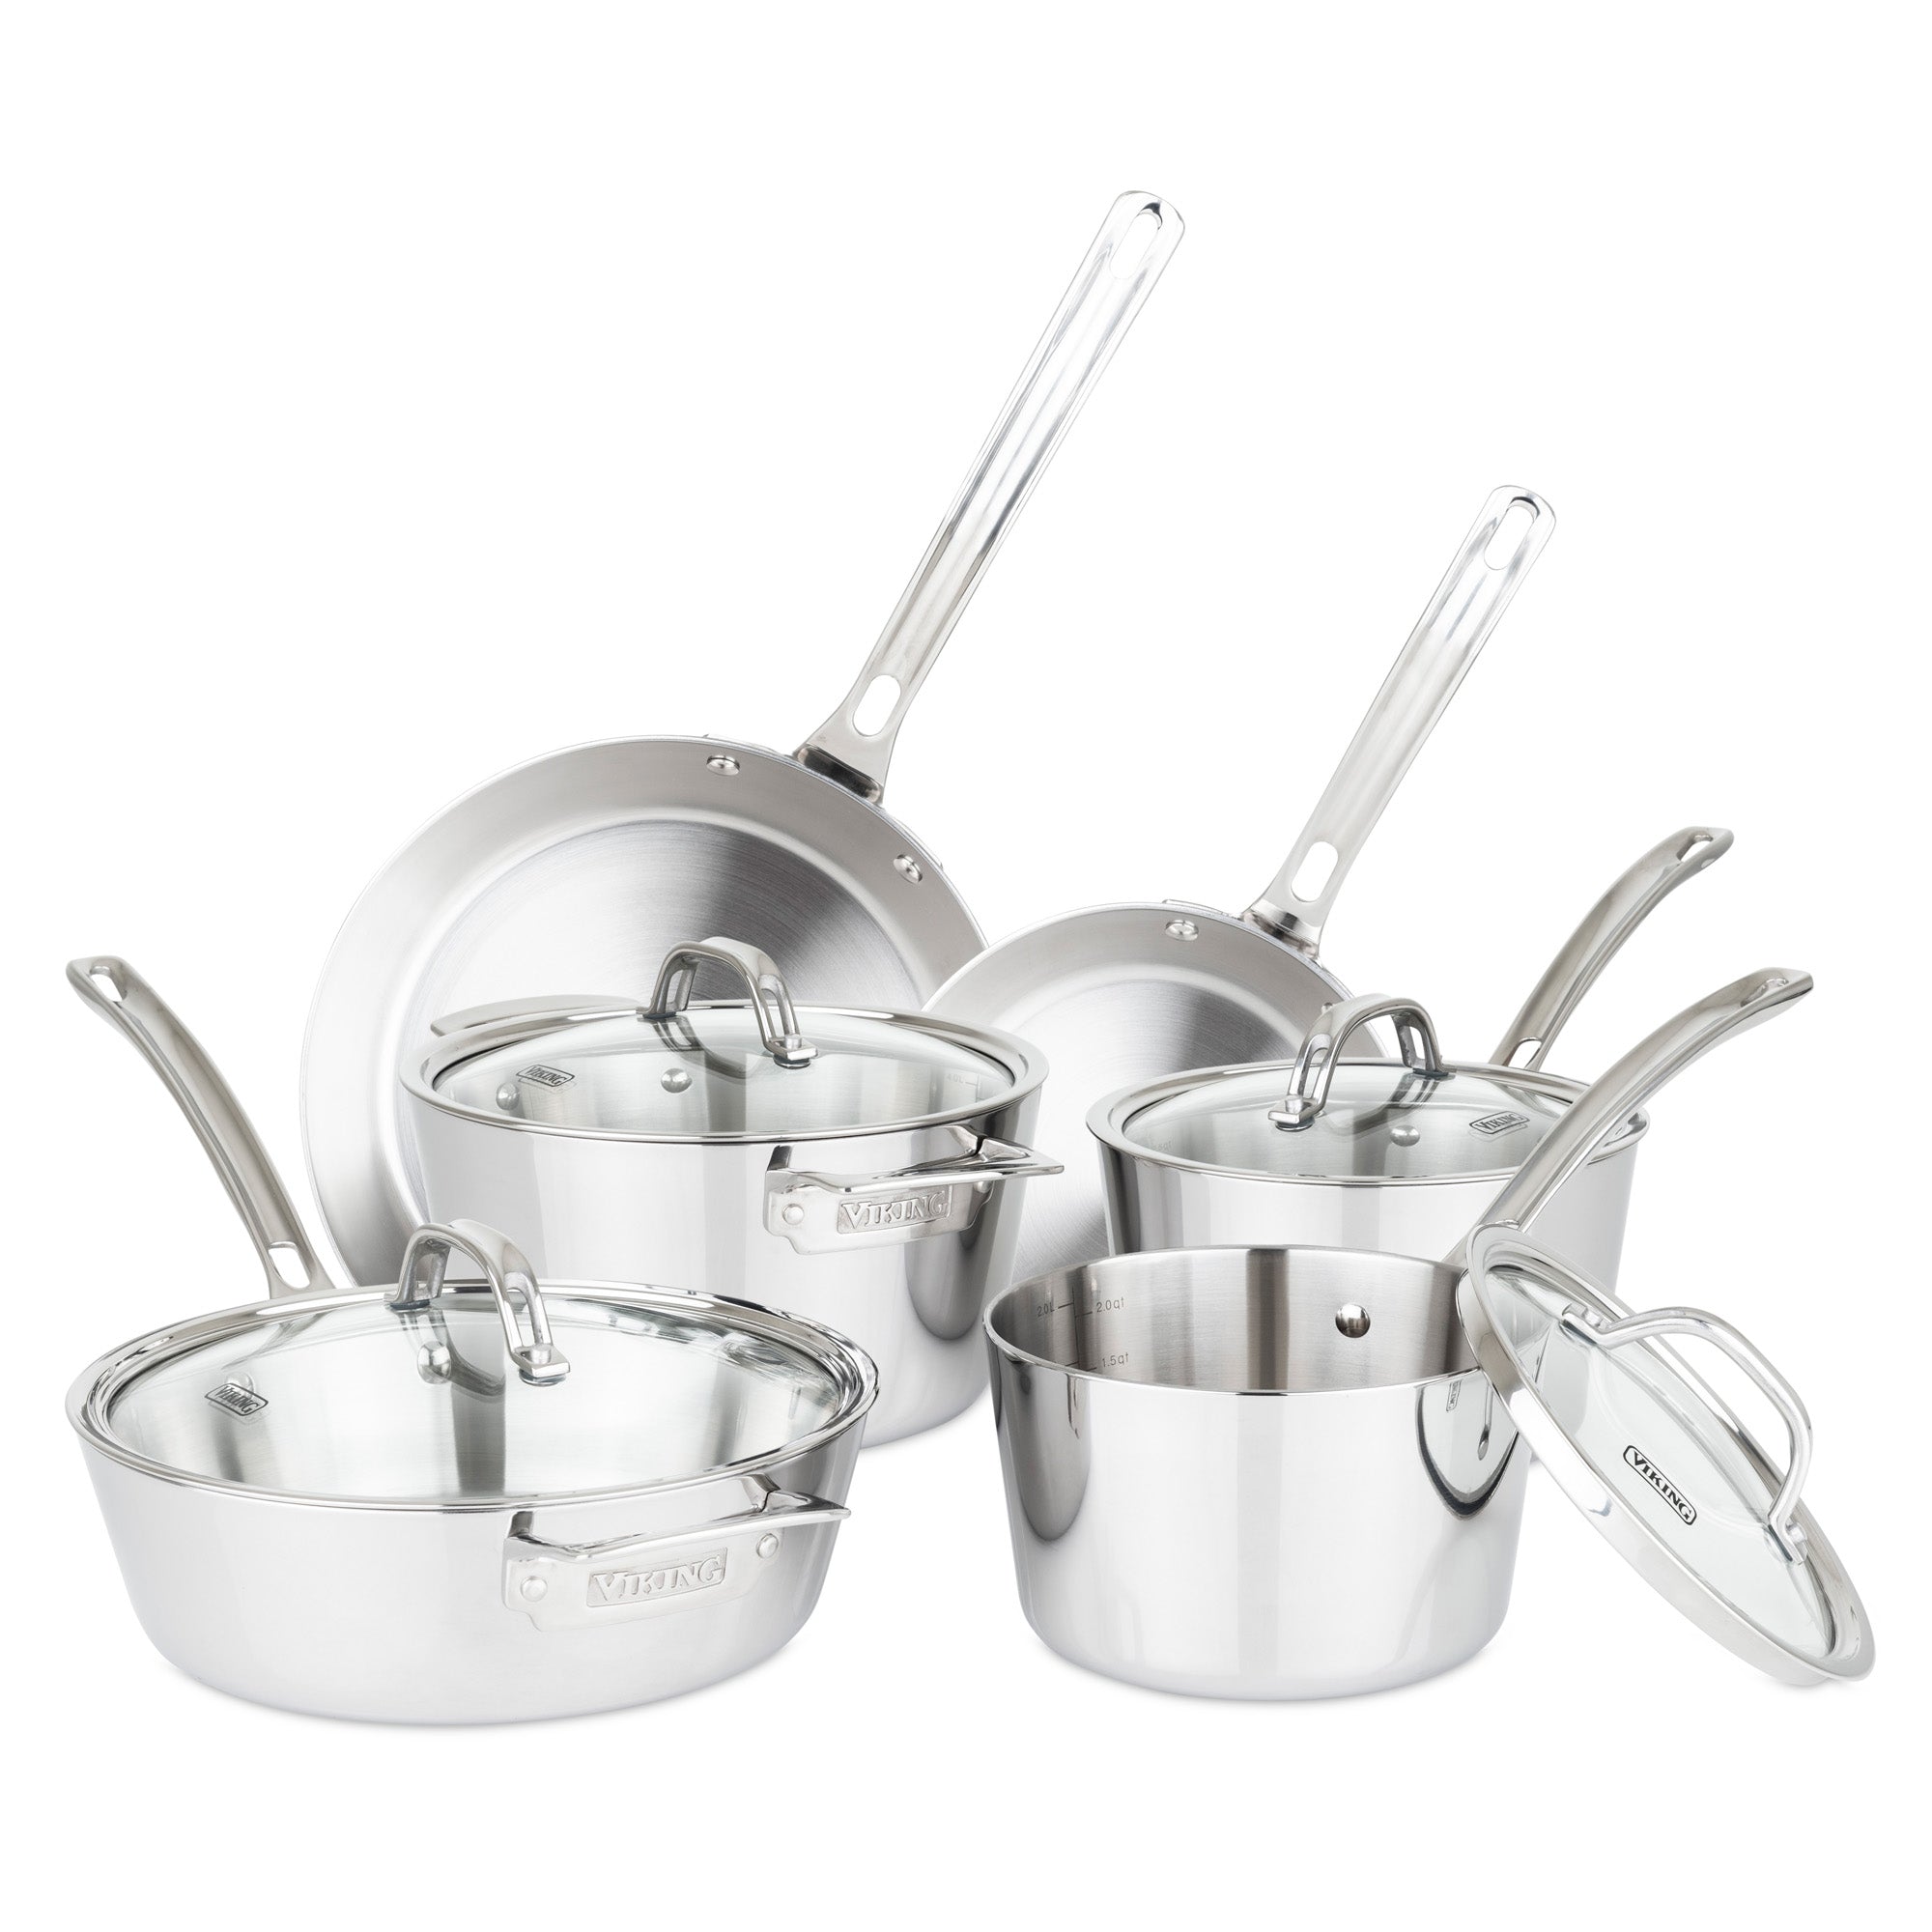 Viking Contemporary 3-Ply Stainless Steel 10-Piece Cookware Set